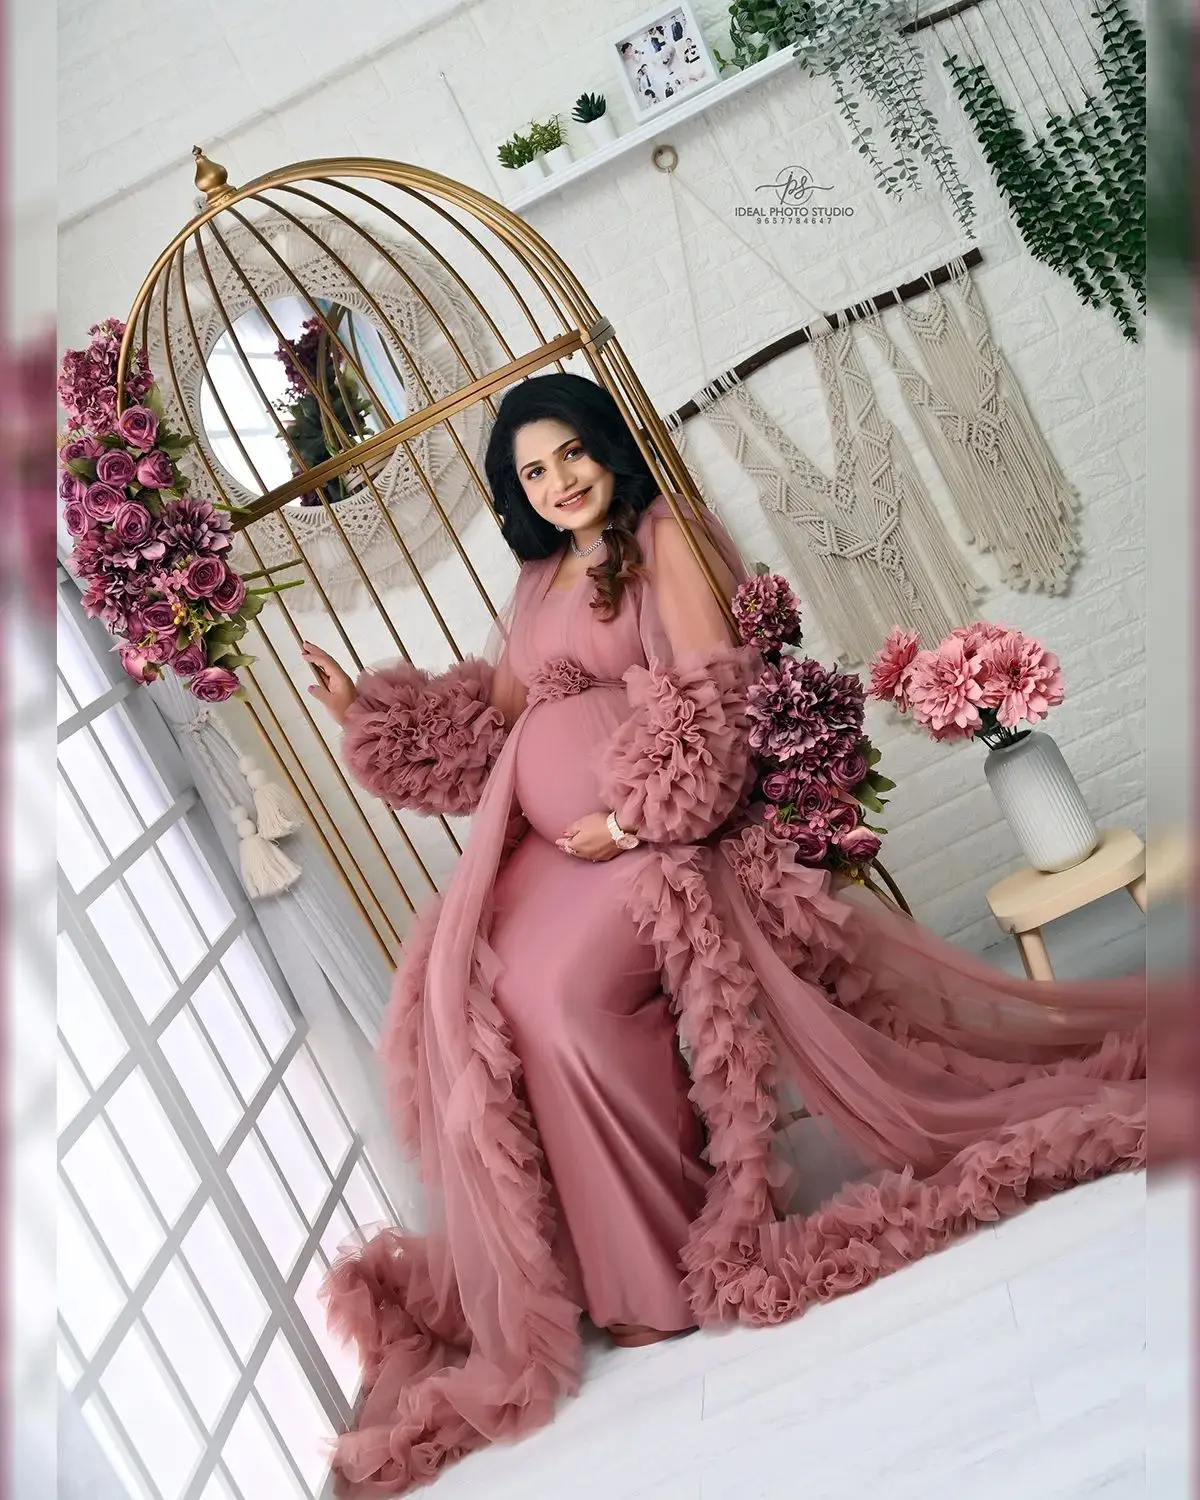 

Brown Women Pregnant Prom Dress Puffy Tiered Tulle Full Sleeves Luxury Photograph Evening Party Gown Robe( no underwear clothes)